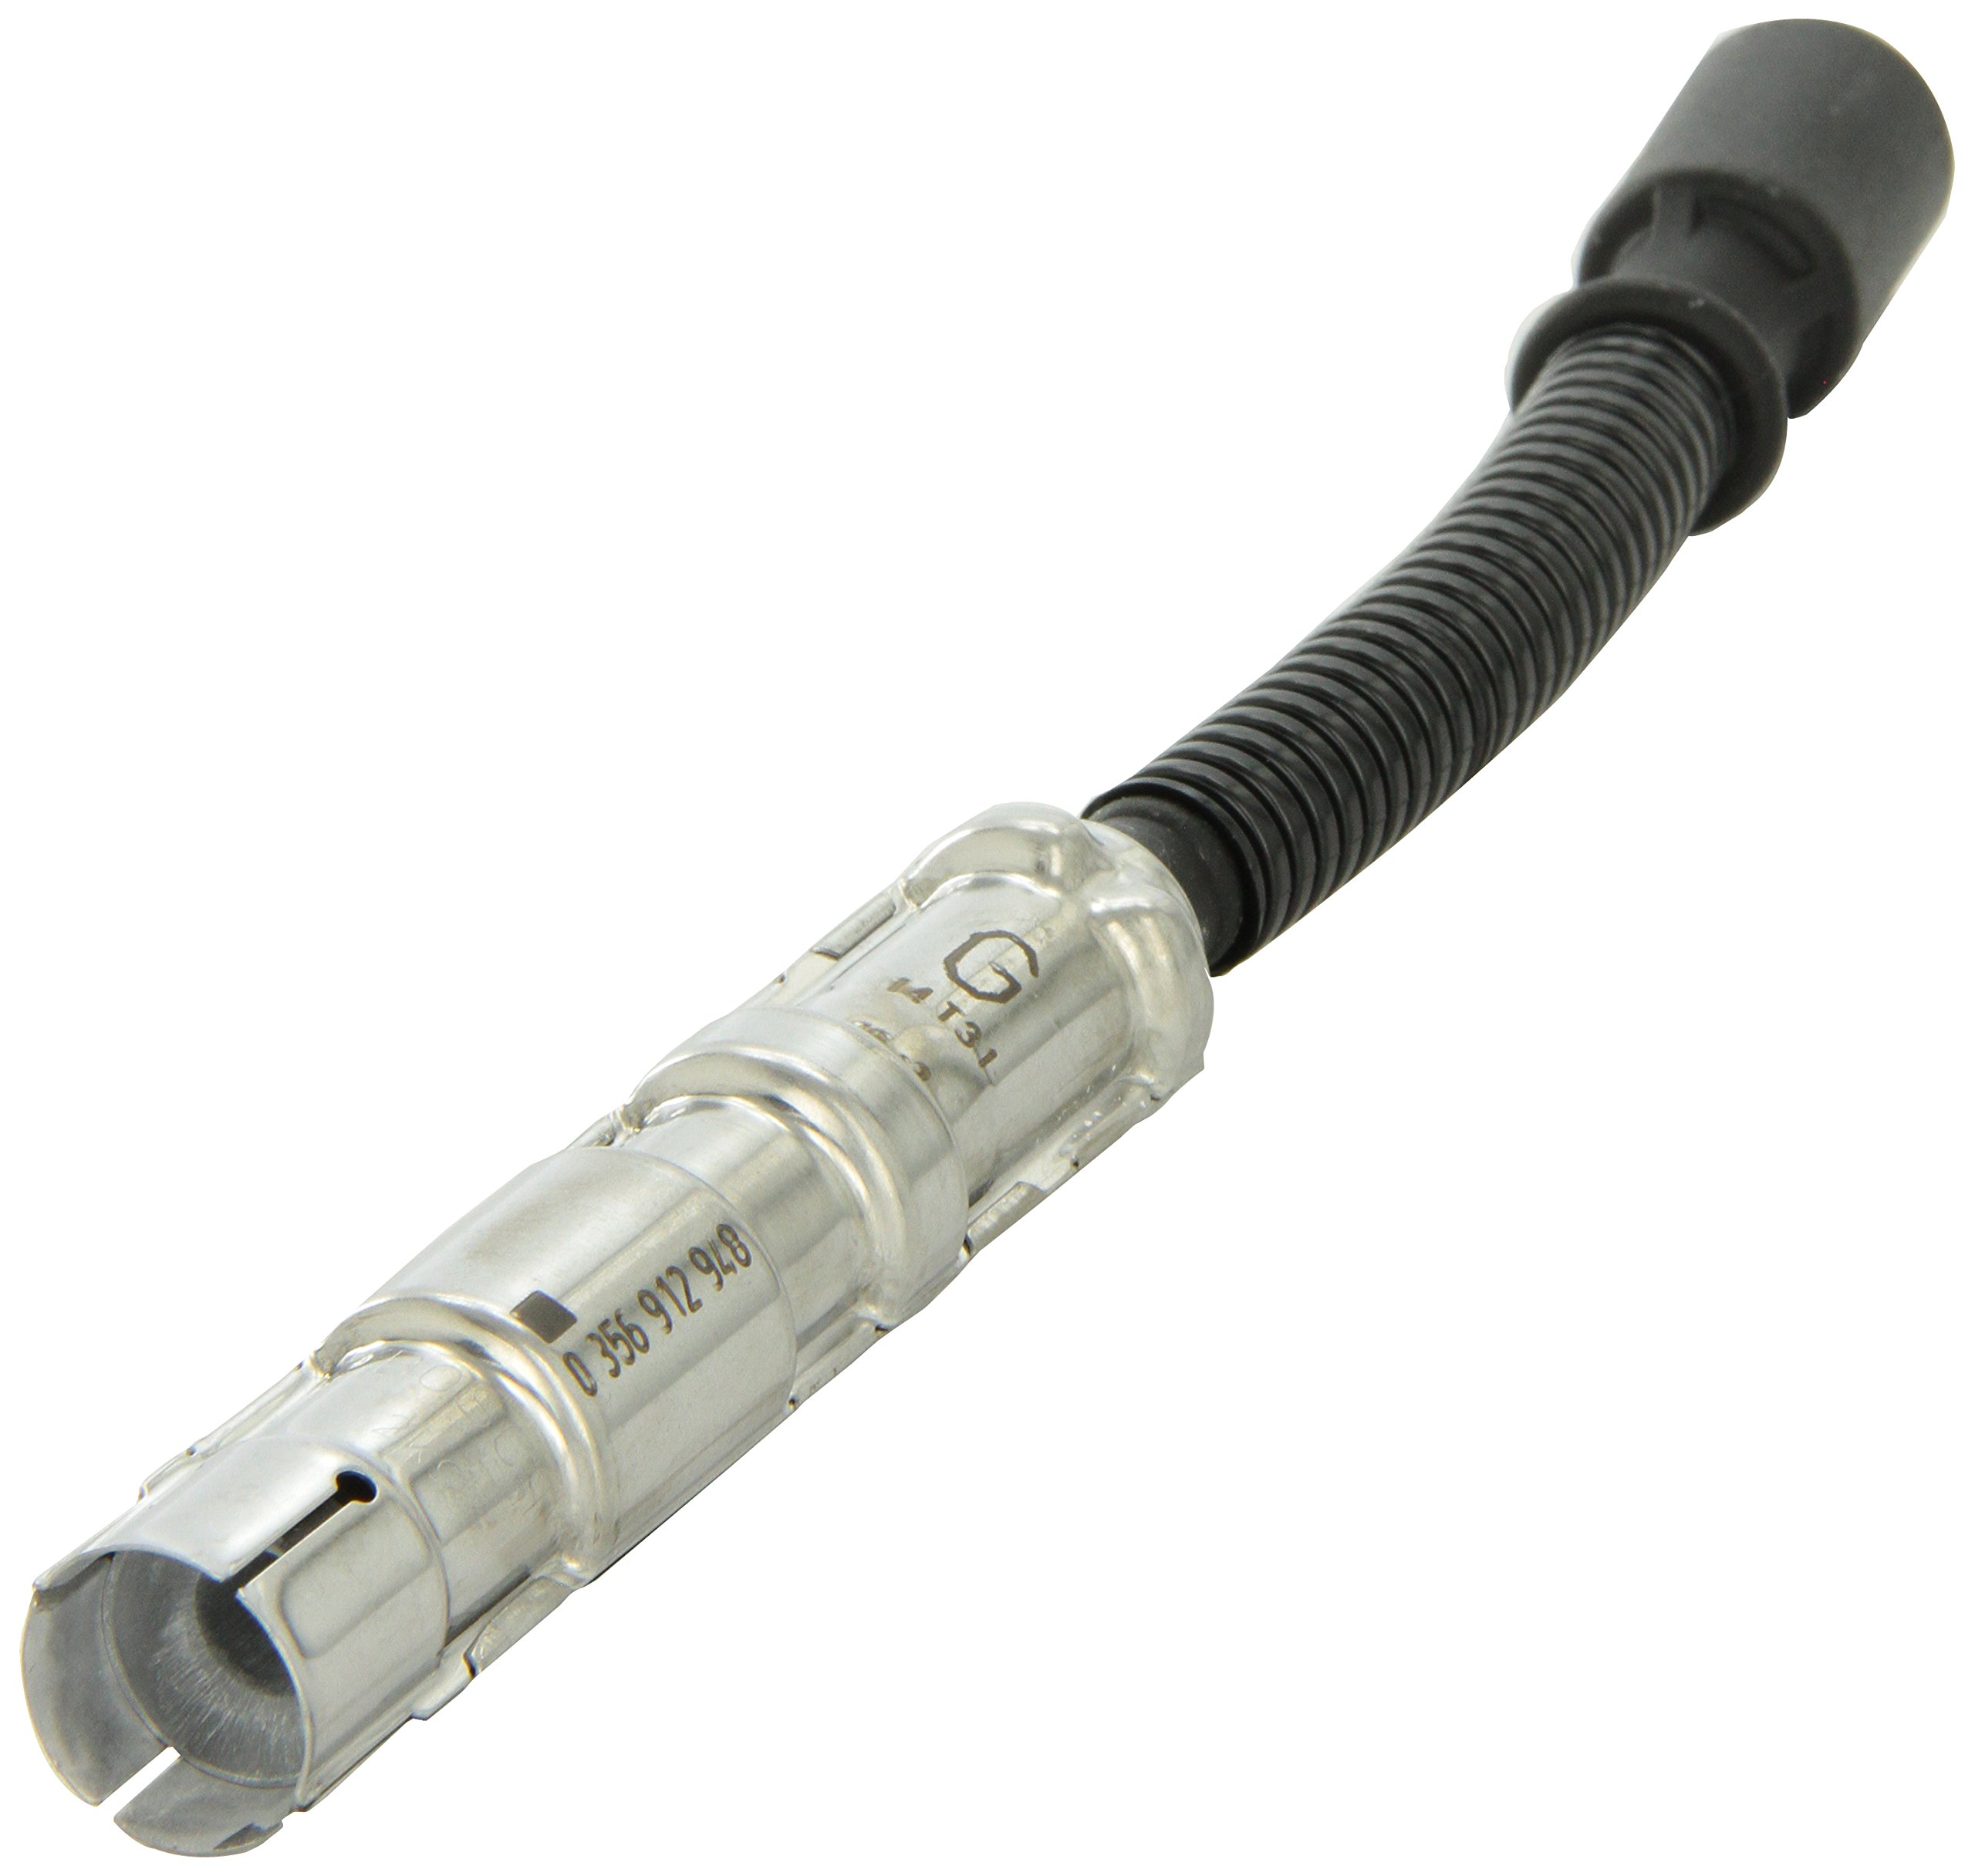 bosch spark plug wires review